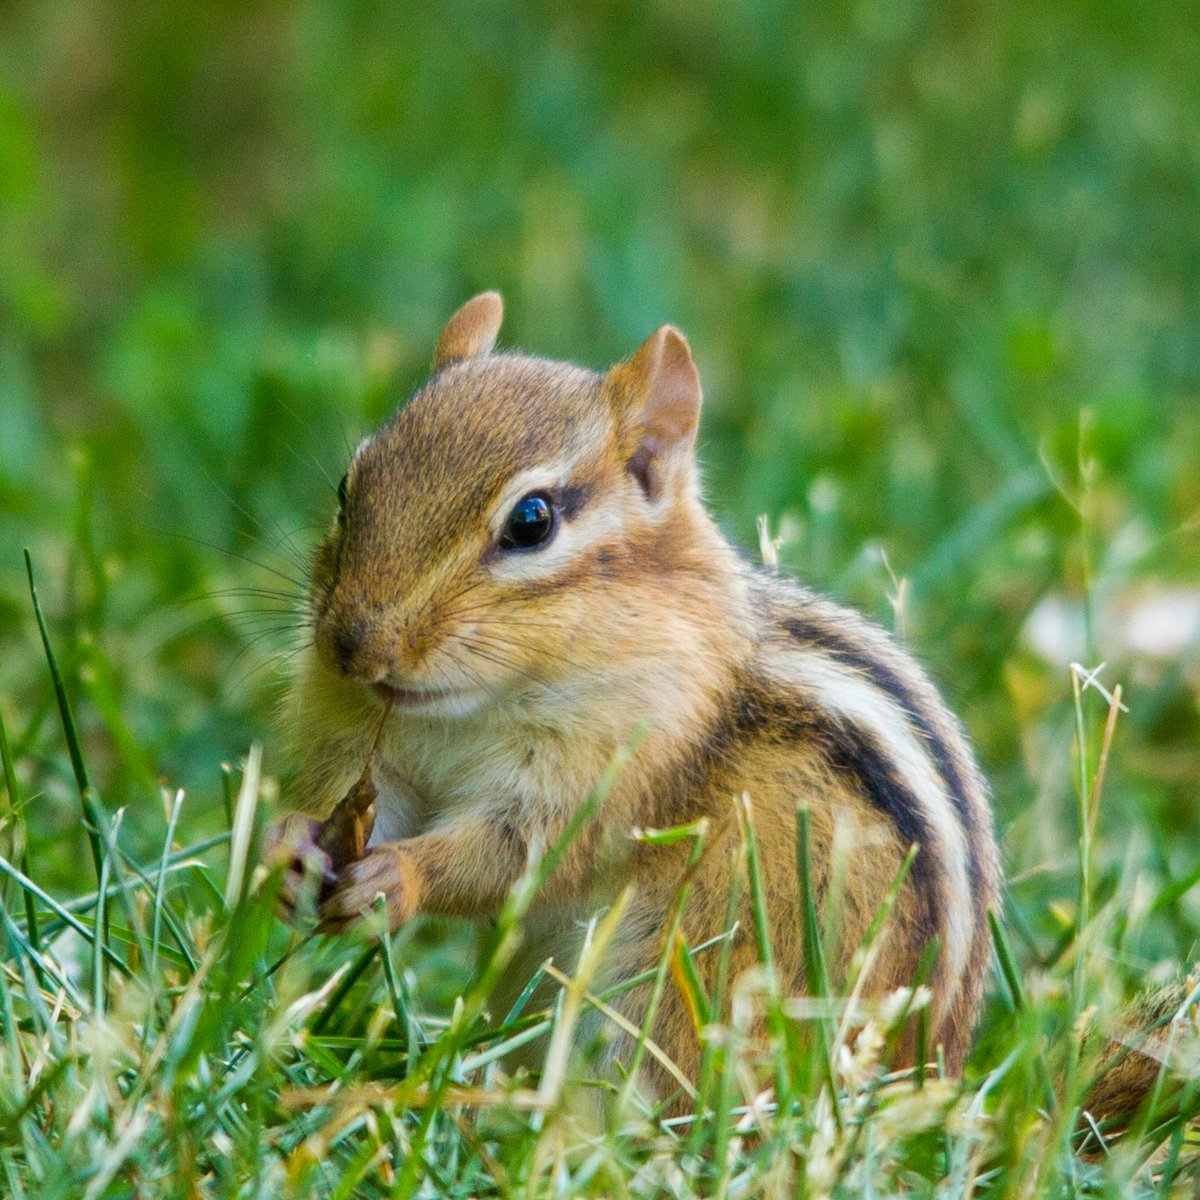 Got some pics of this cheeky chipmunk who isn't afraid of people. She/he came to within about 4 feet of where I was sitting on the grass. #jasonryanpix #canon7d #sigma120400 #chipmunk